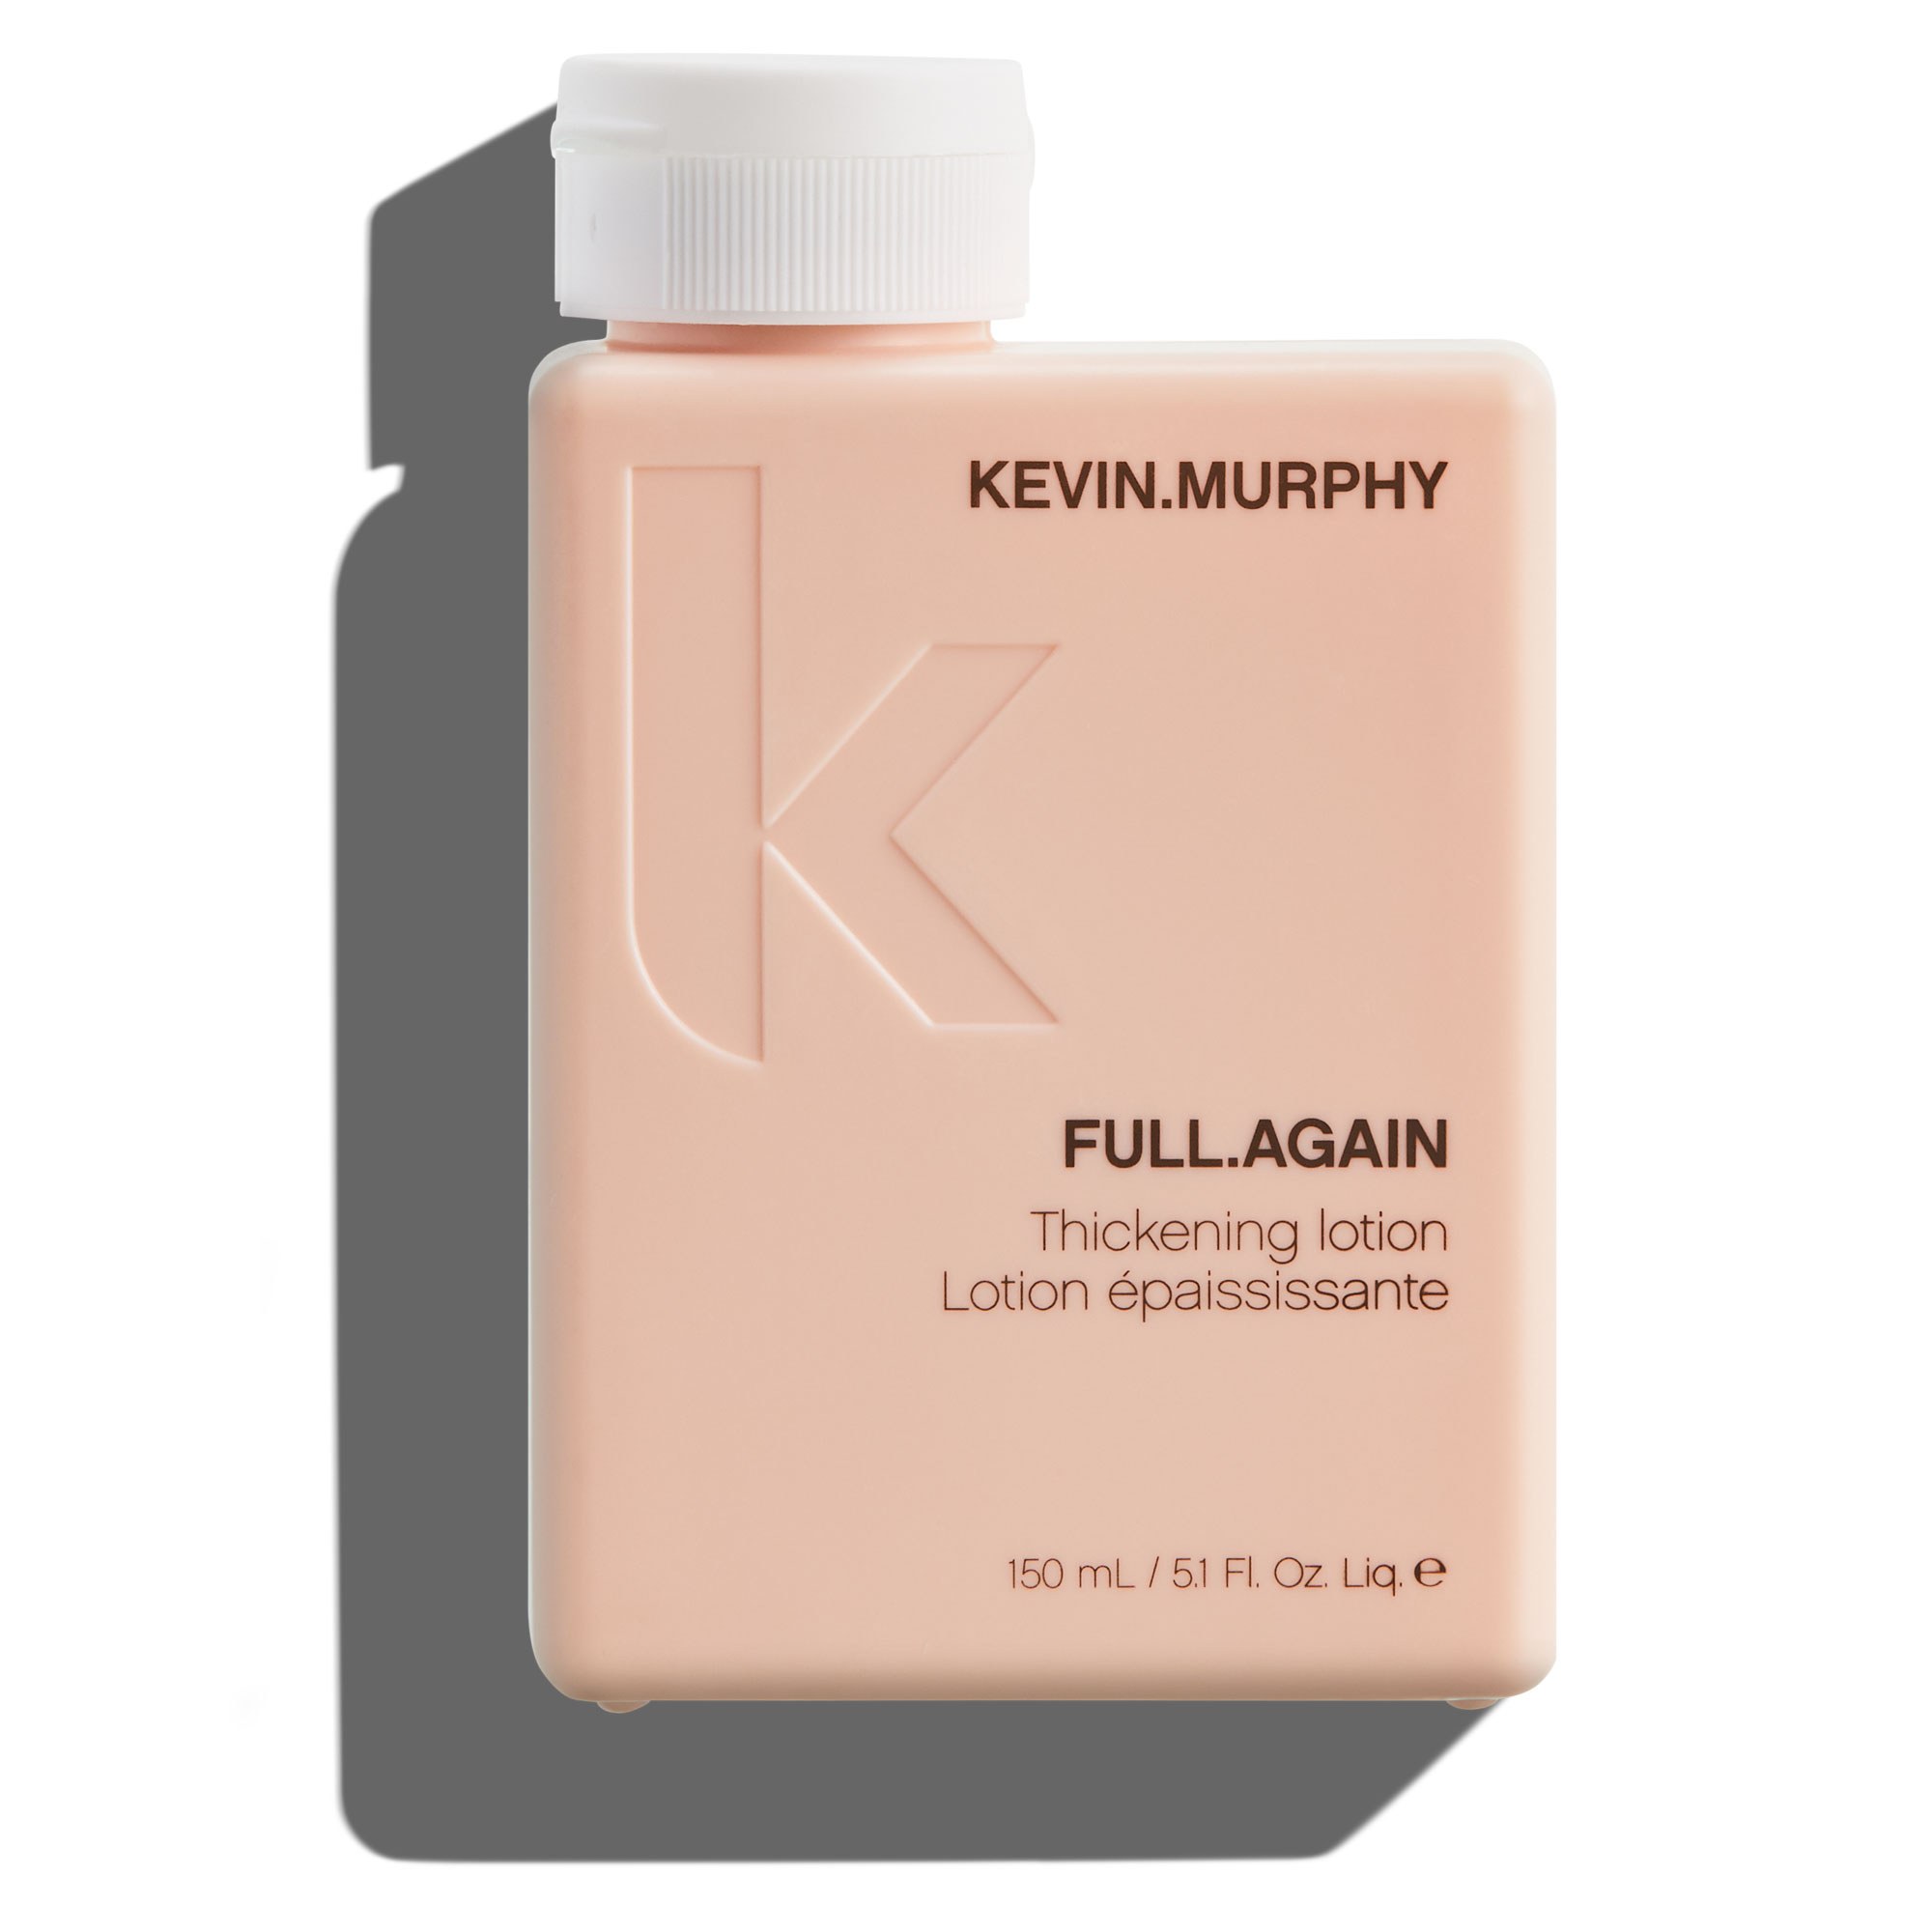 KEVIN.MURPHY FULL.AGAIN Thickening Lotion